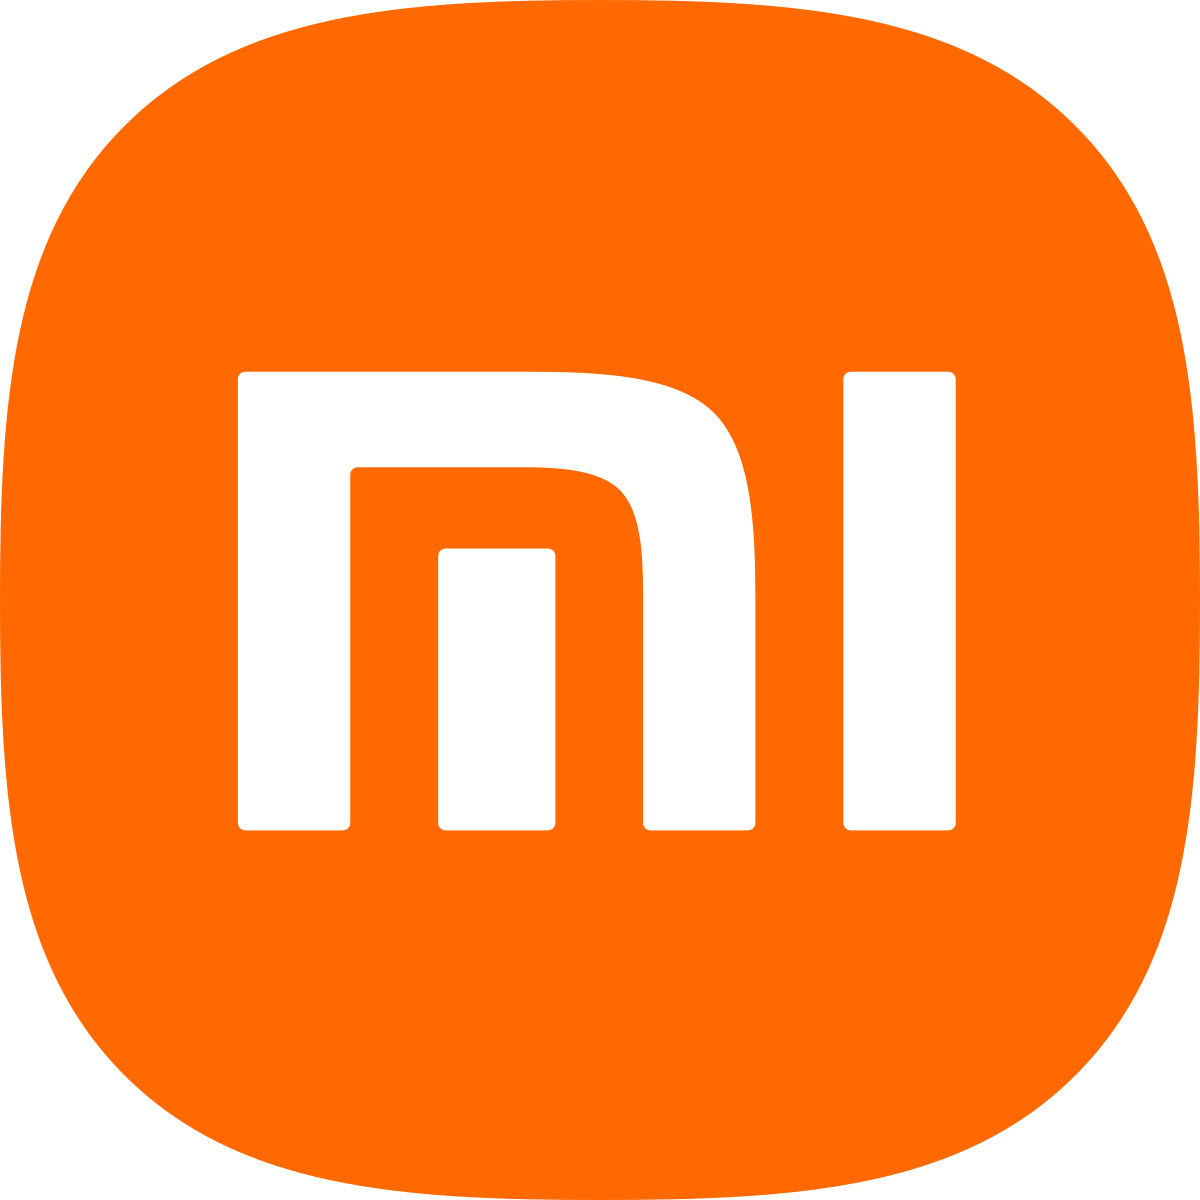 Xiaomi is developing technologies for remote surgeries